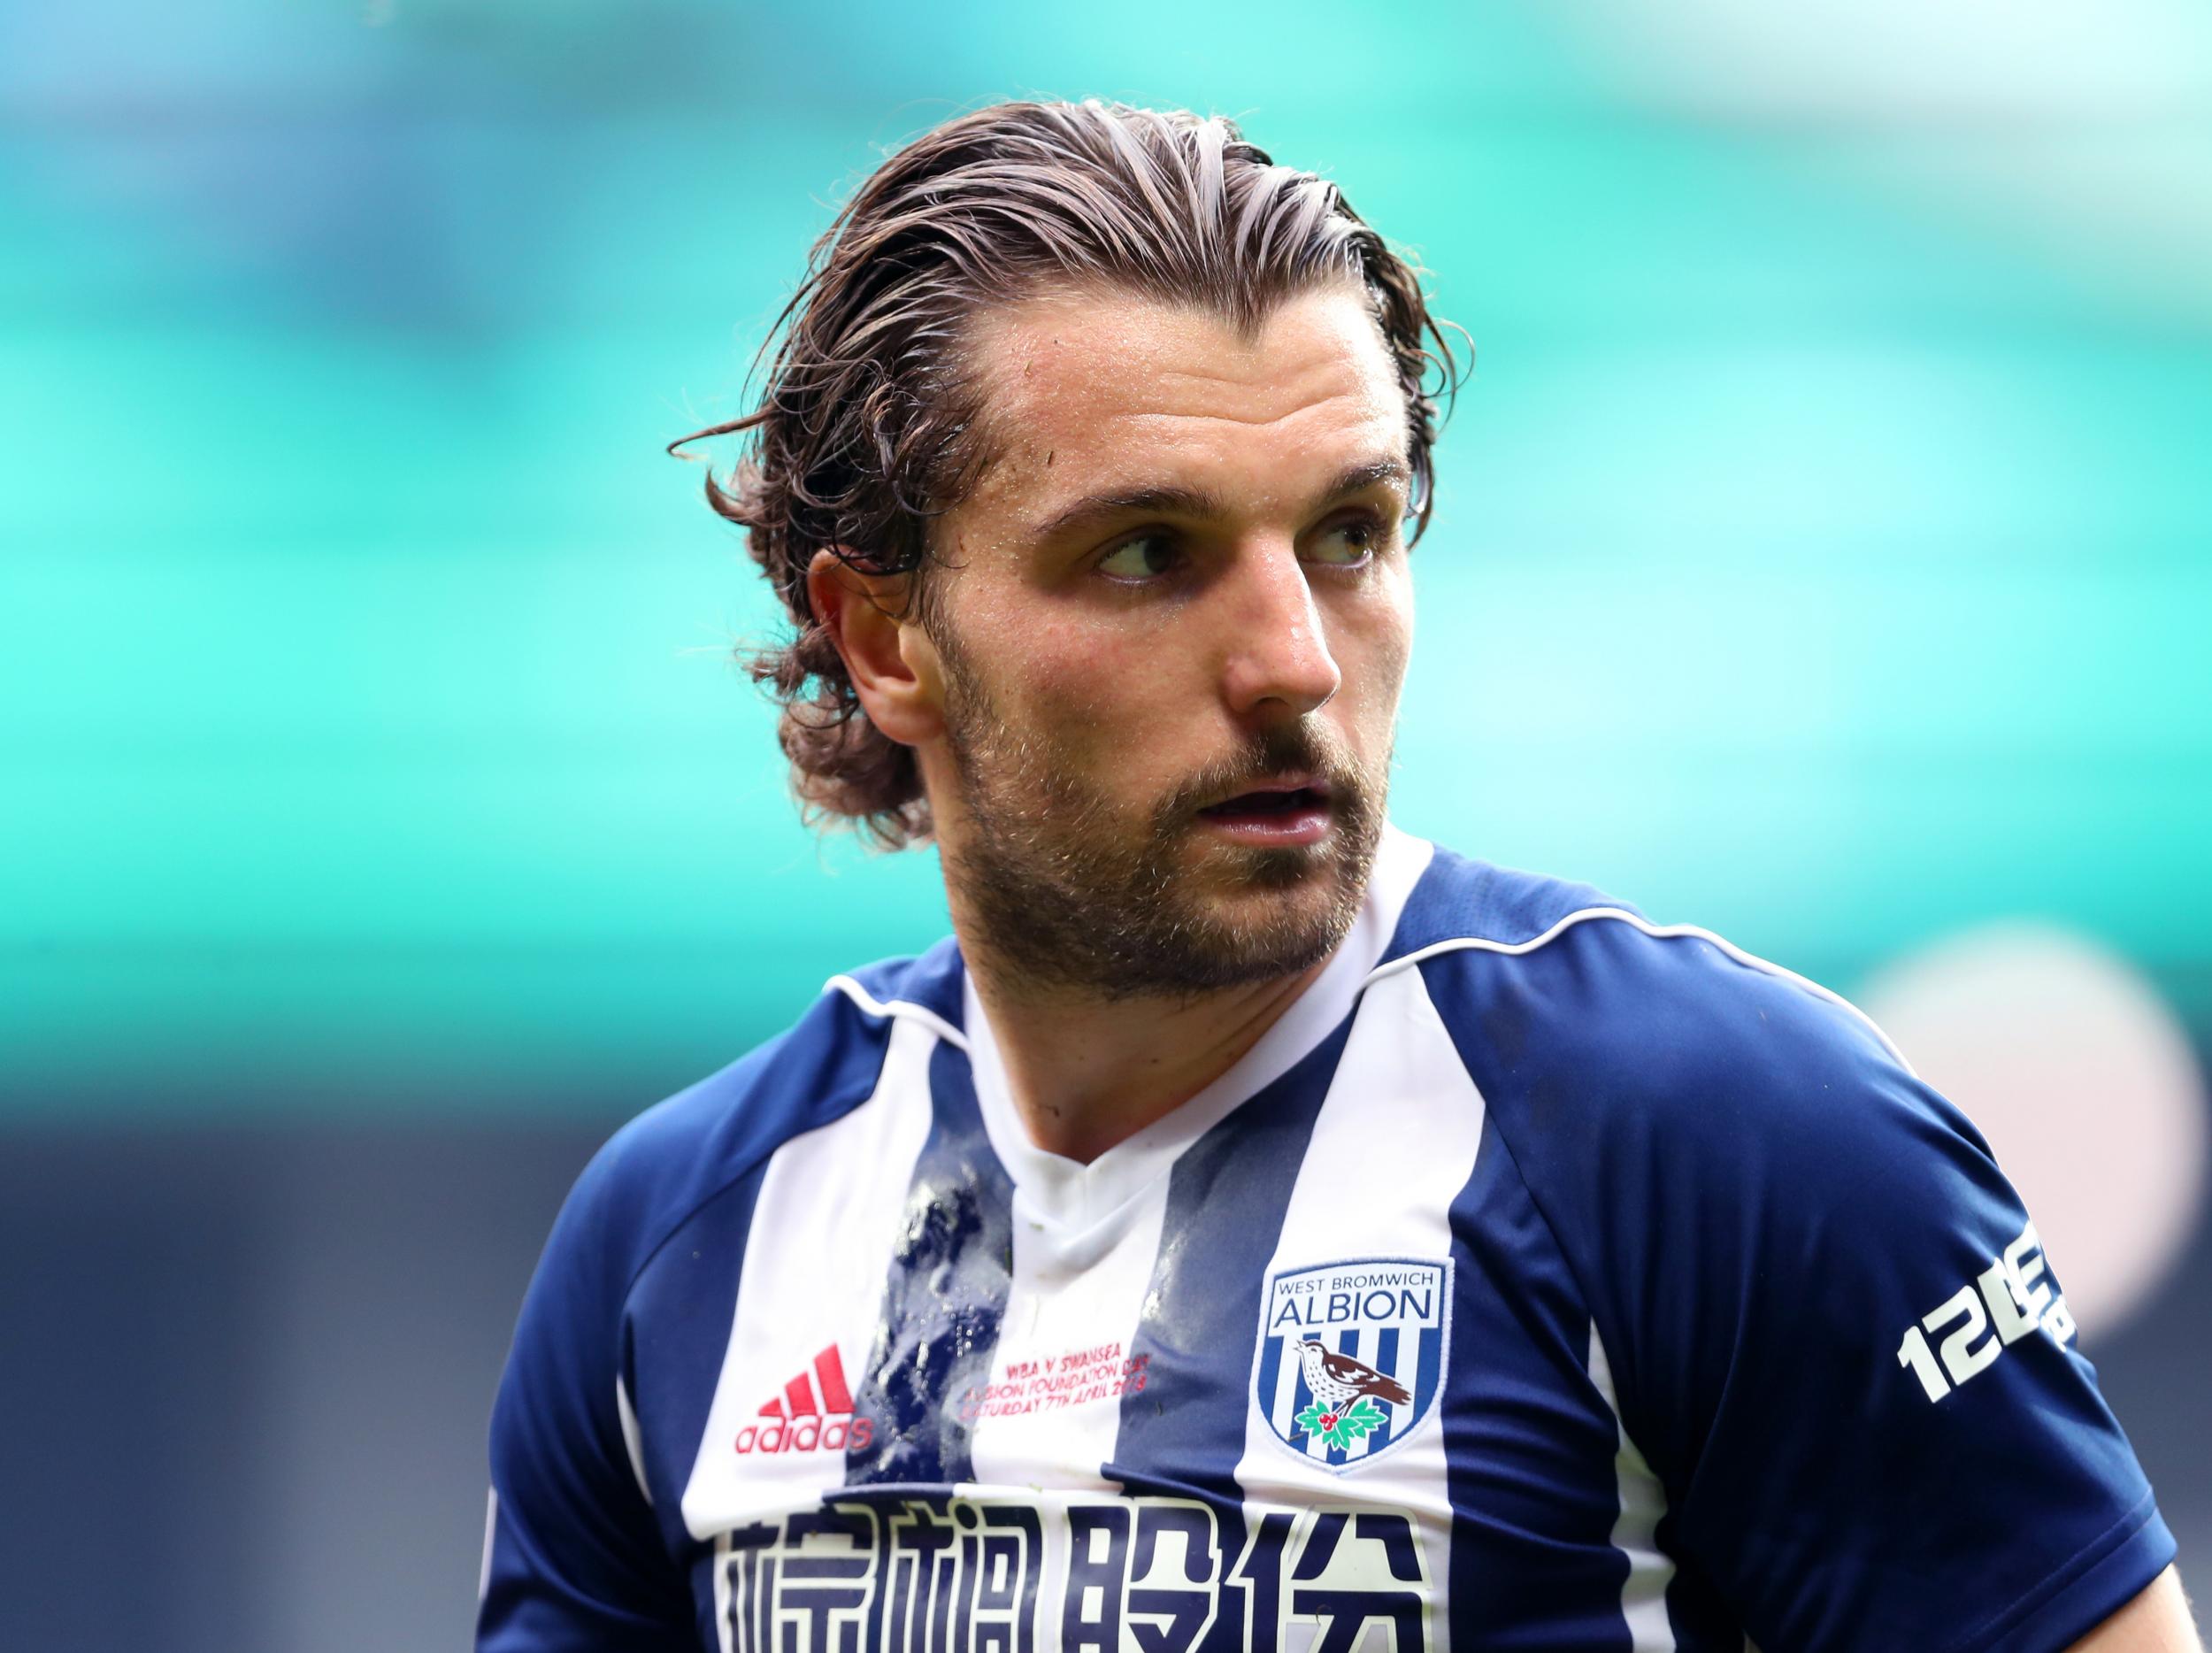 Jay Rodriguez has been cleared of using discriminatory language